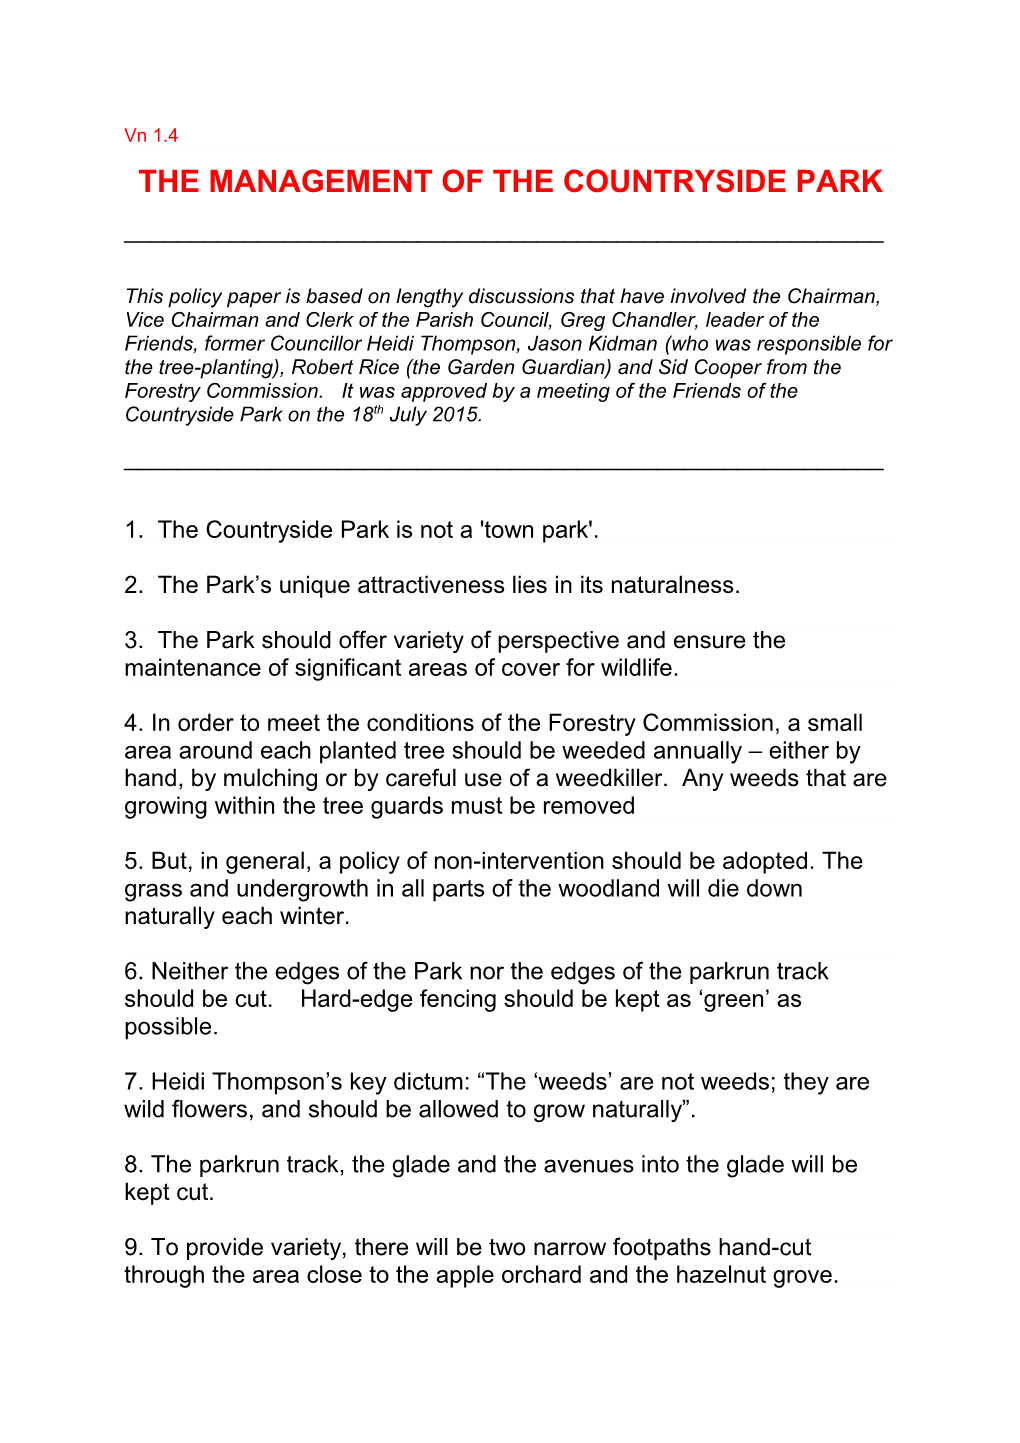 The Management of the Countryside Park